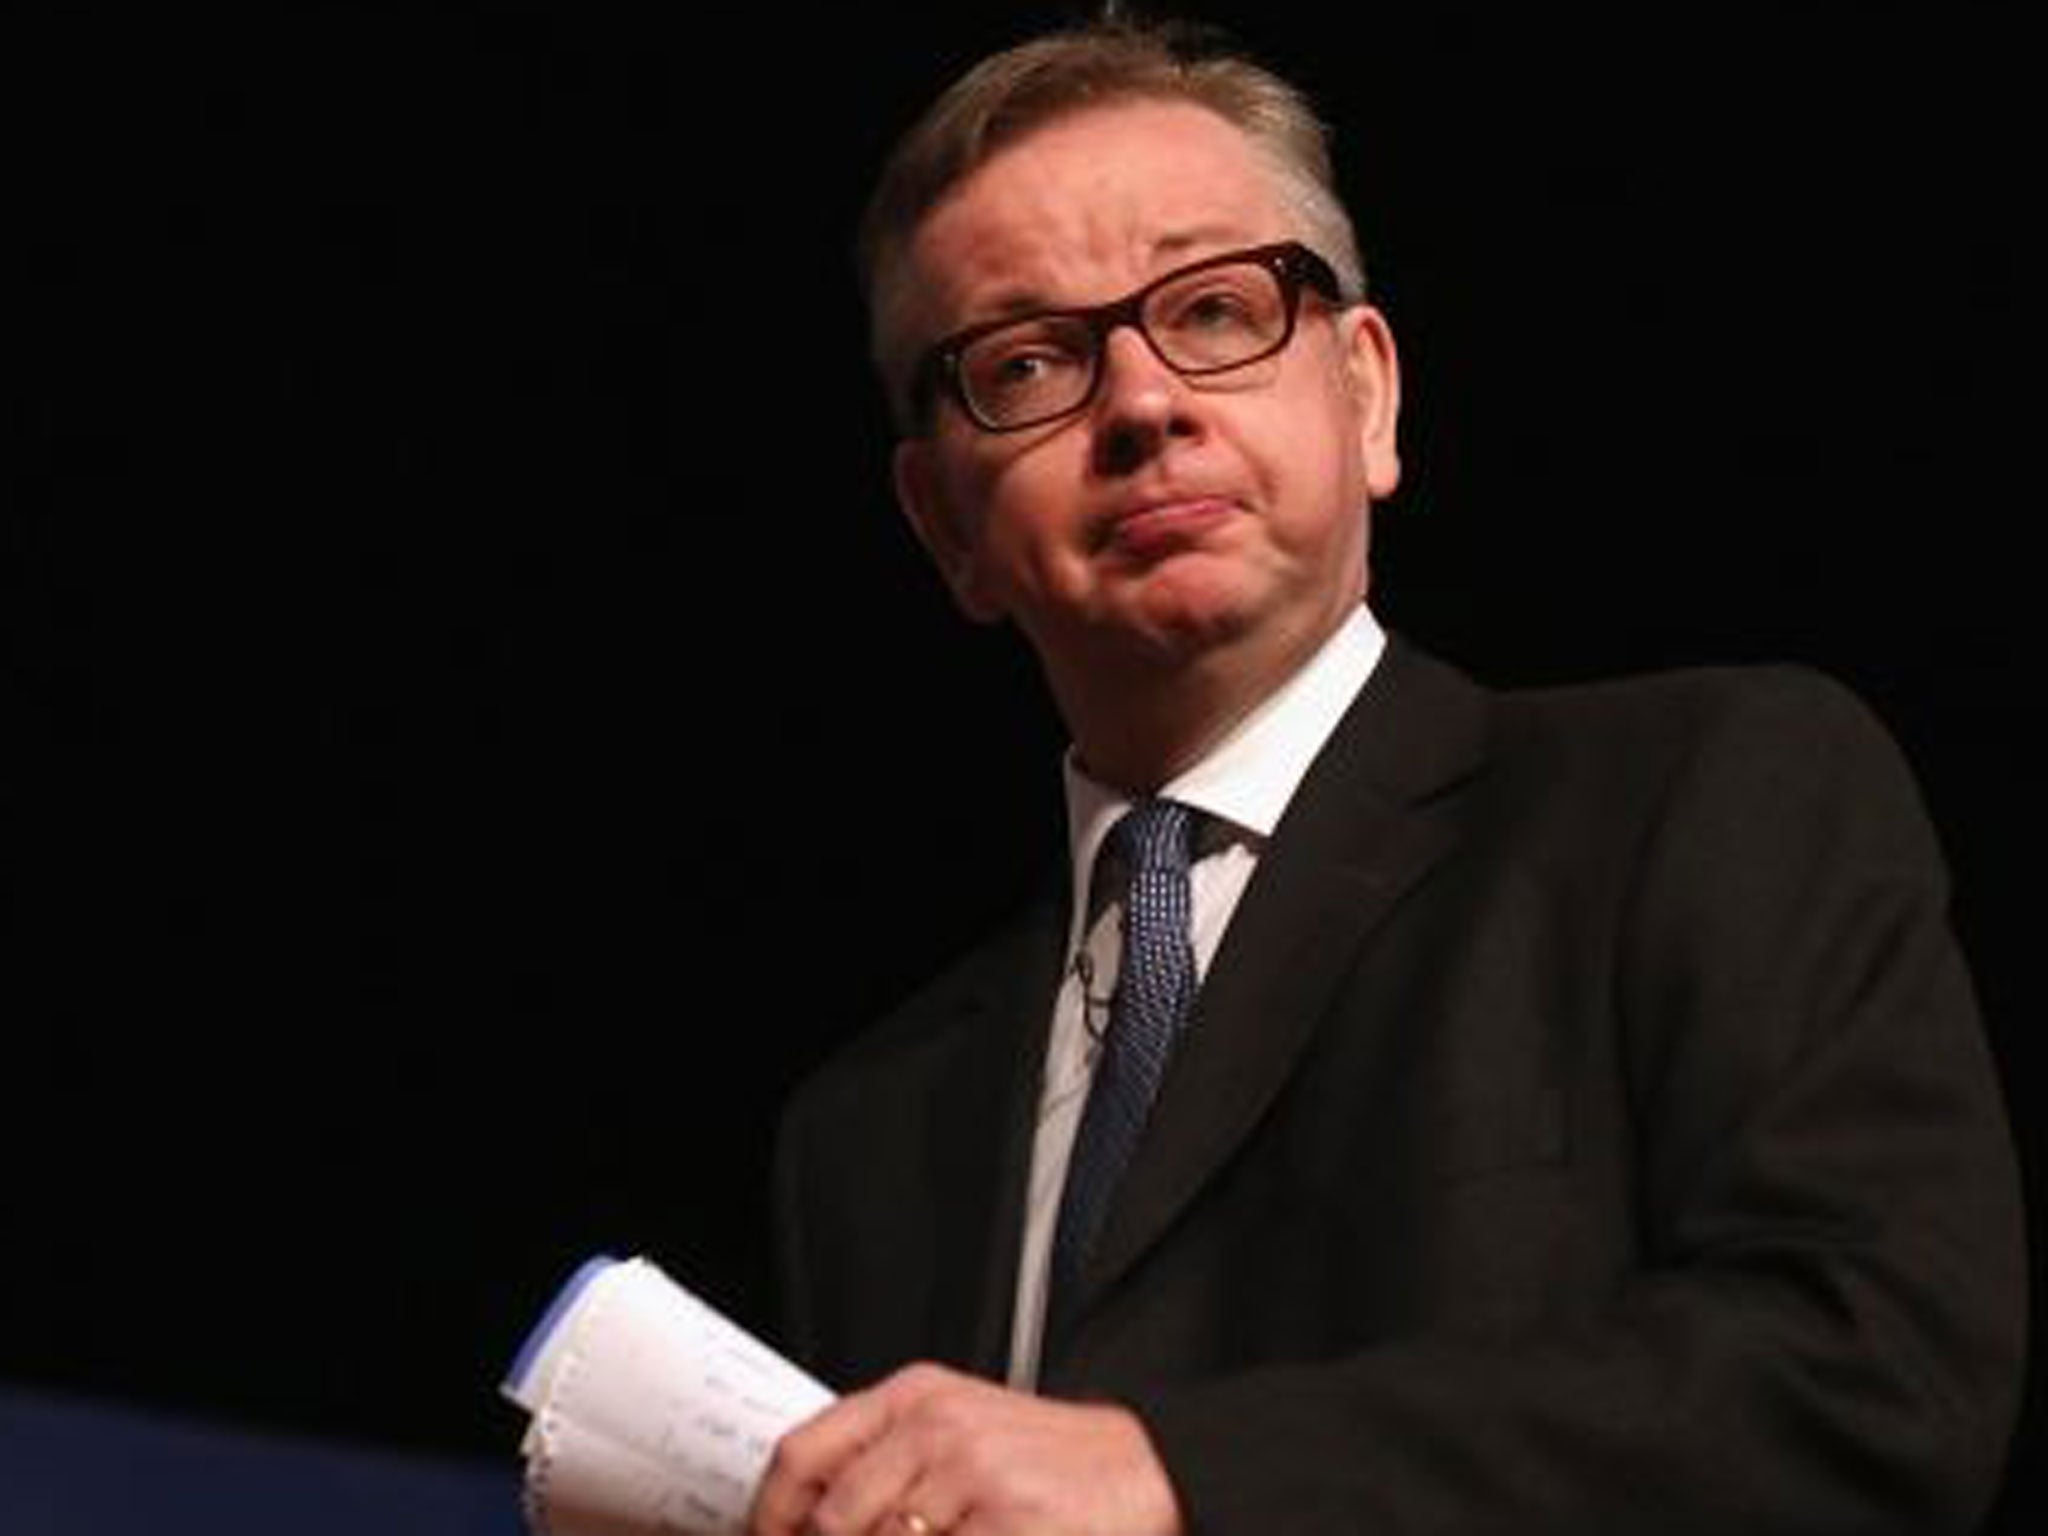 Michael Gove could face legal action over his department's slow responses to Freedom of Information requests